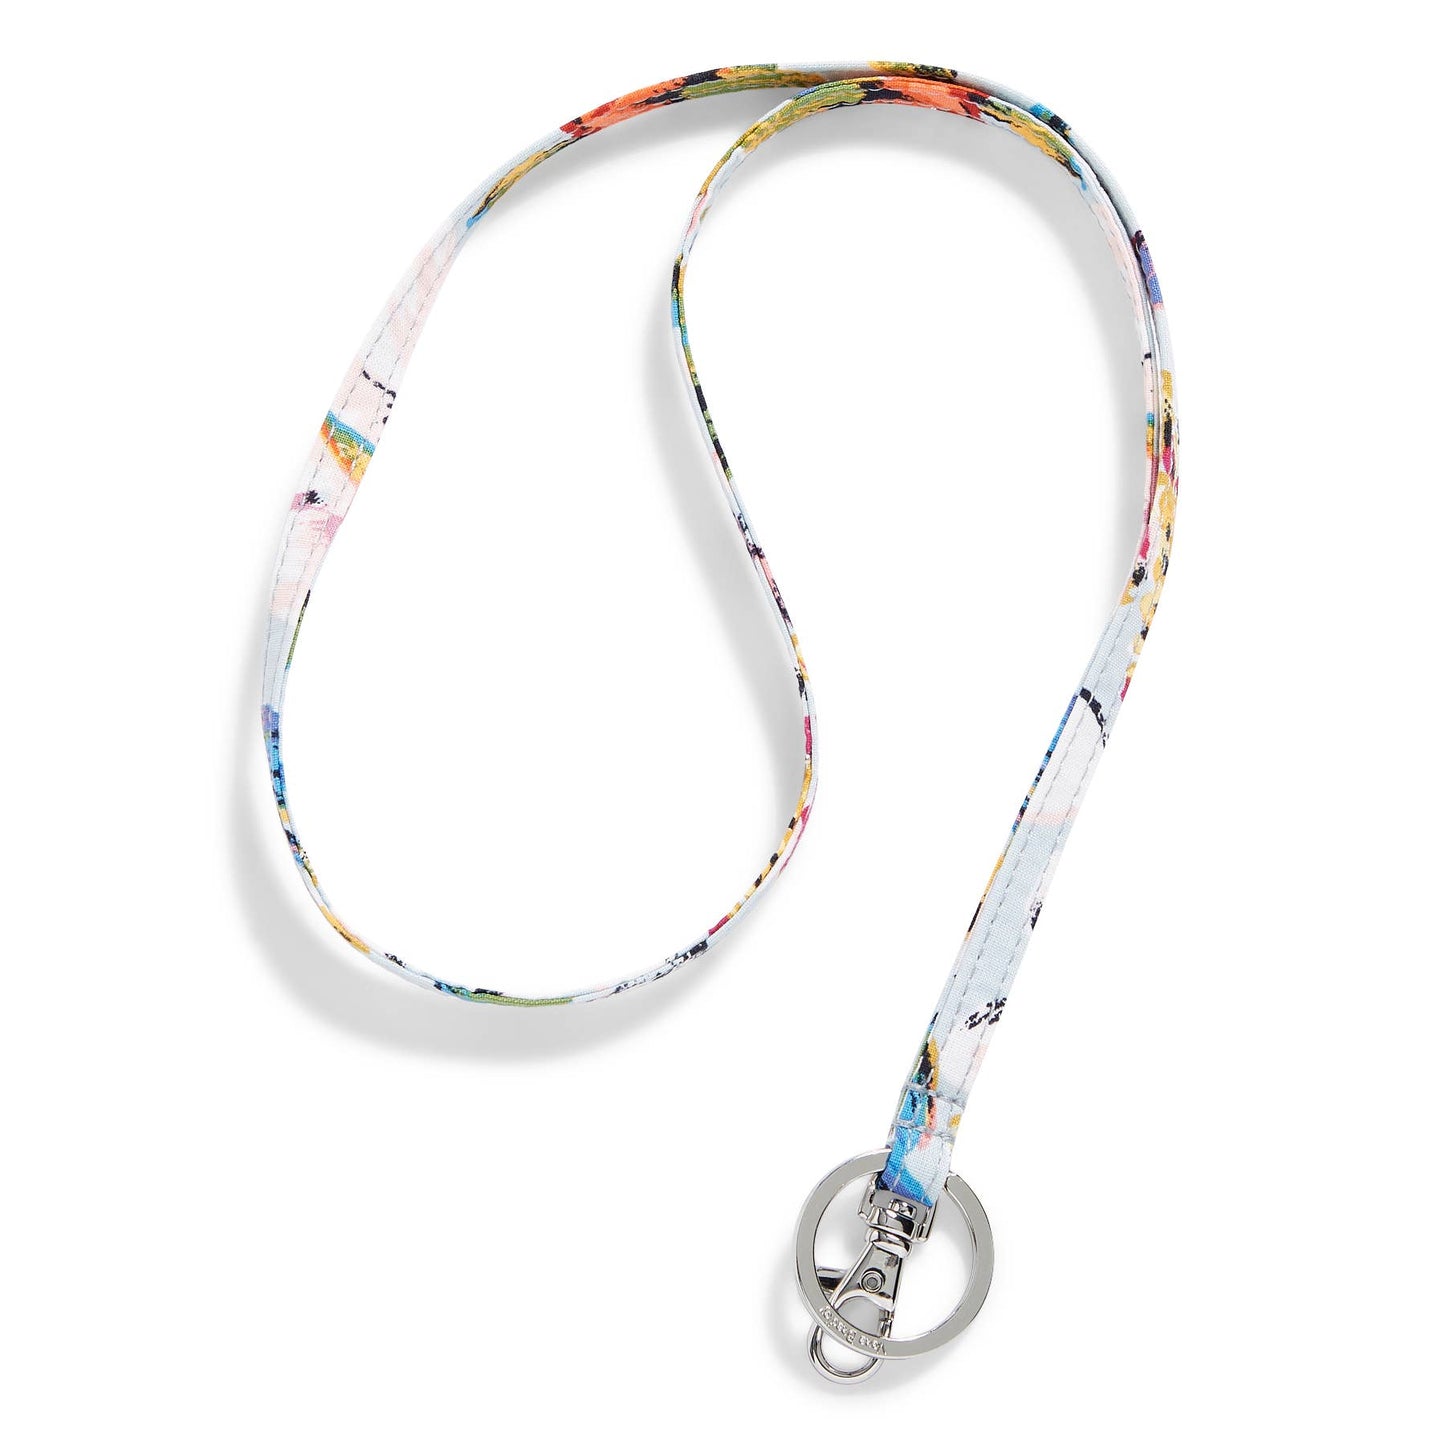 Sea Air Floral Recycled Cotton Lanyard Core Vera Bradley